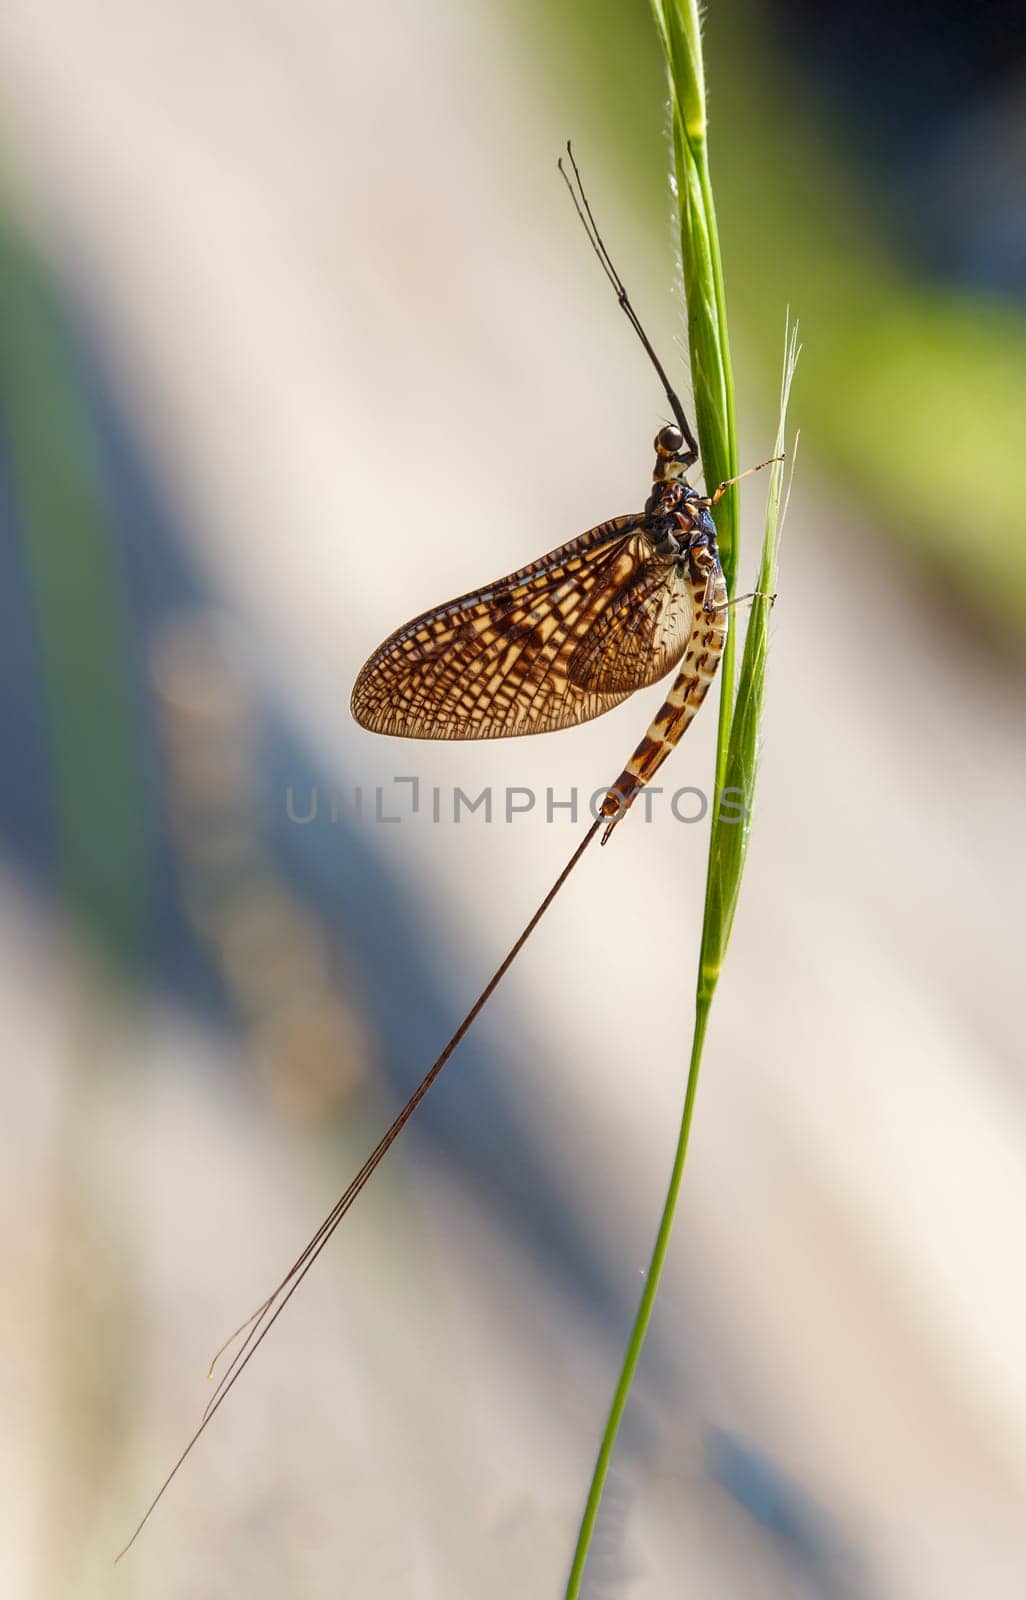 Mayfly, also known as shadflies or fishflies, sit on a leaf. Vertical view